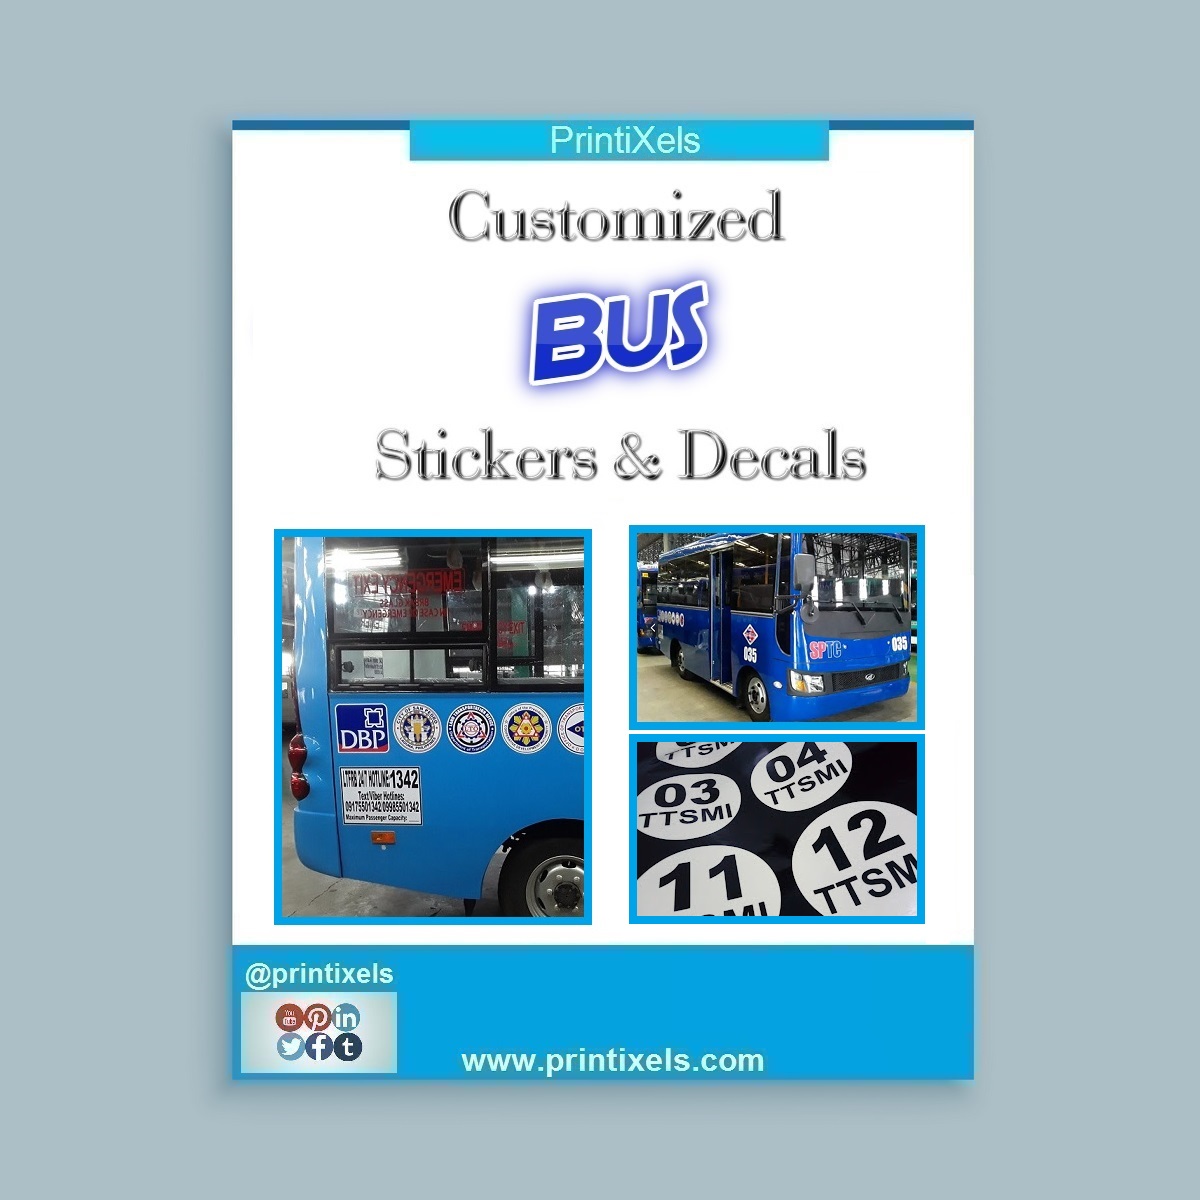 Customized Bus Stickers & Decals Philippines